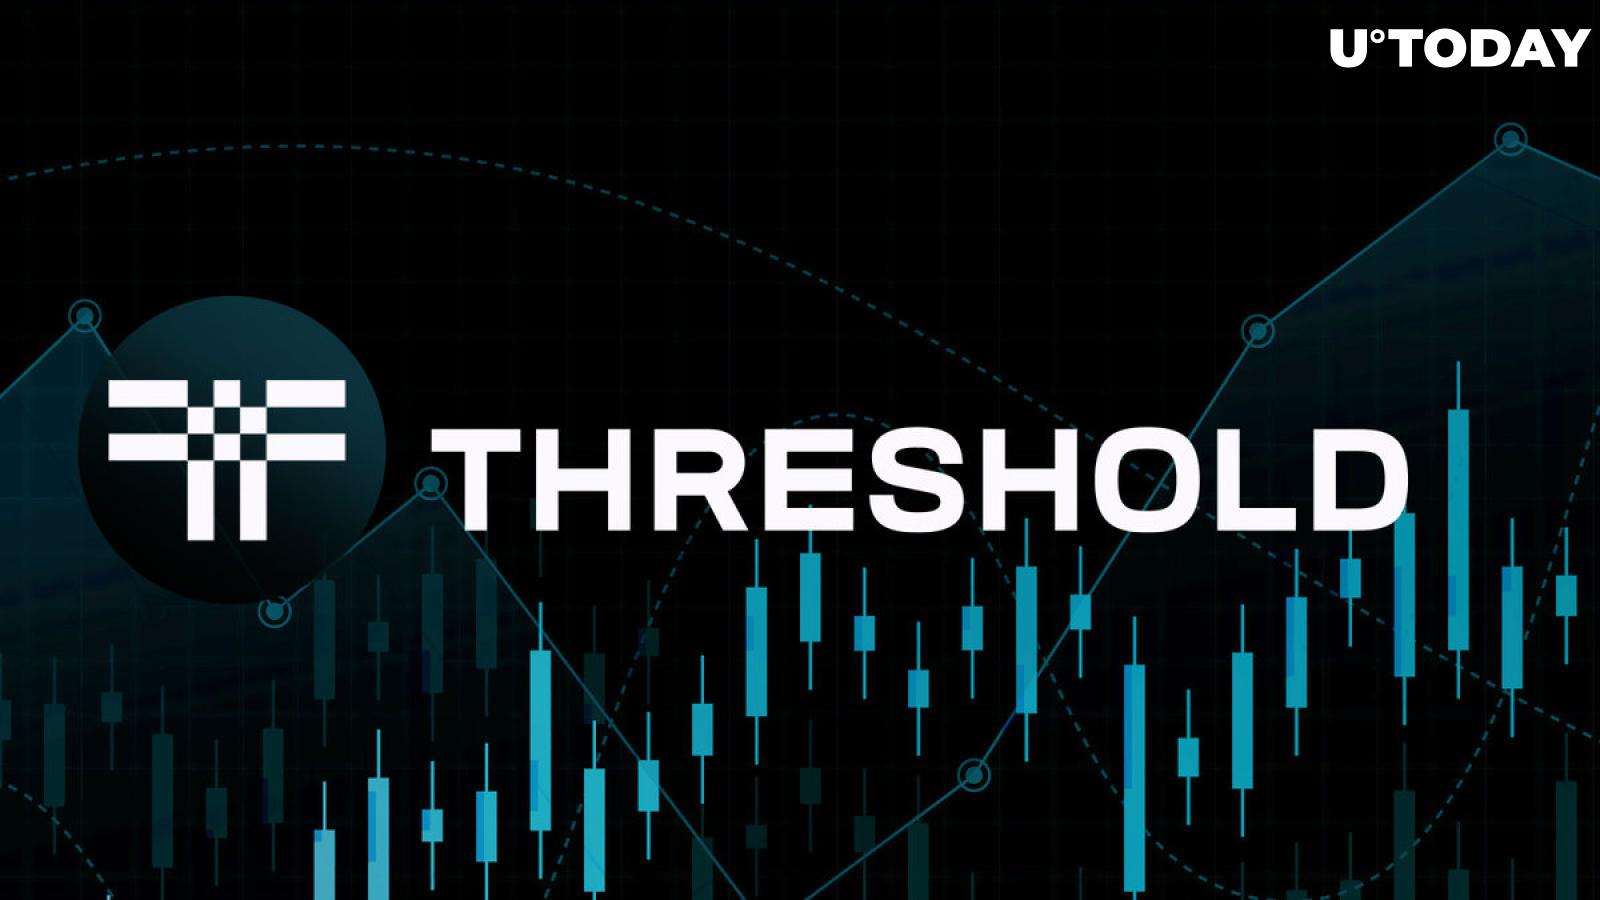 Threshold Network (T) on Bullish Run, Here Are 3 Reasons Why This May Be Trap